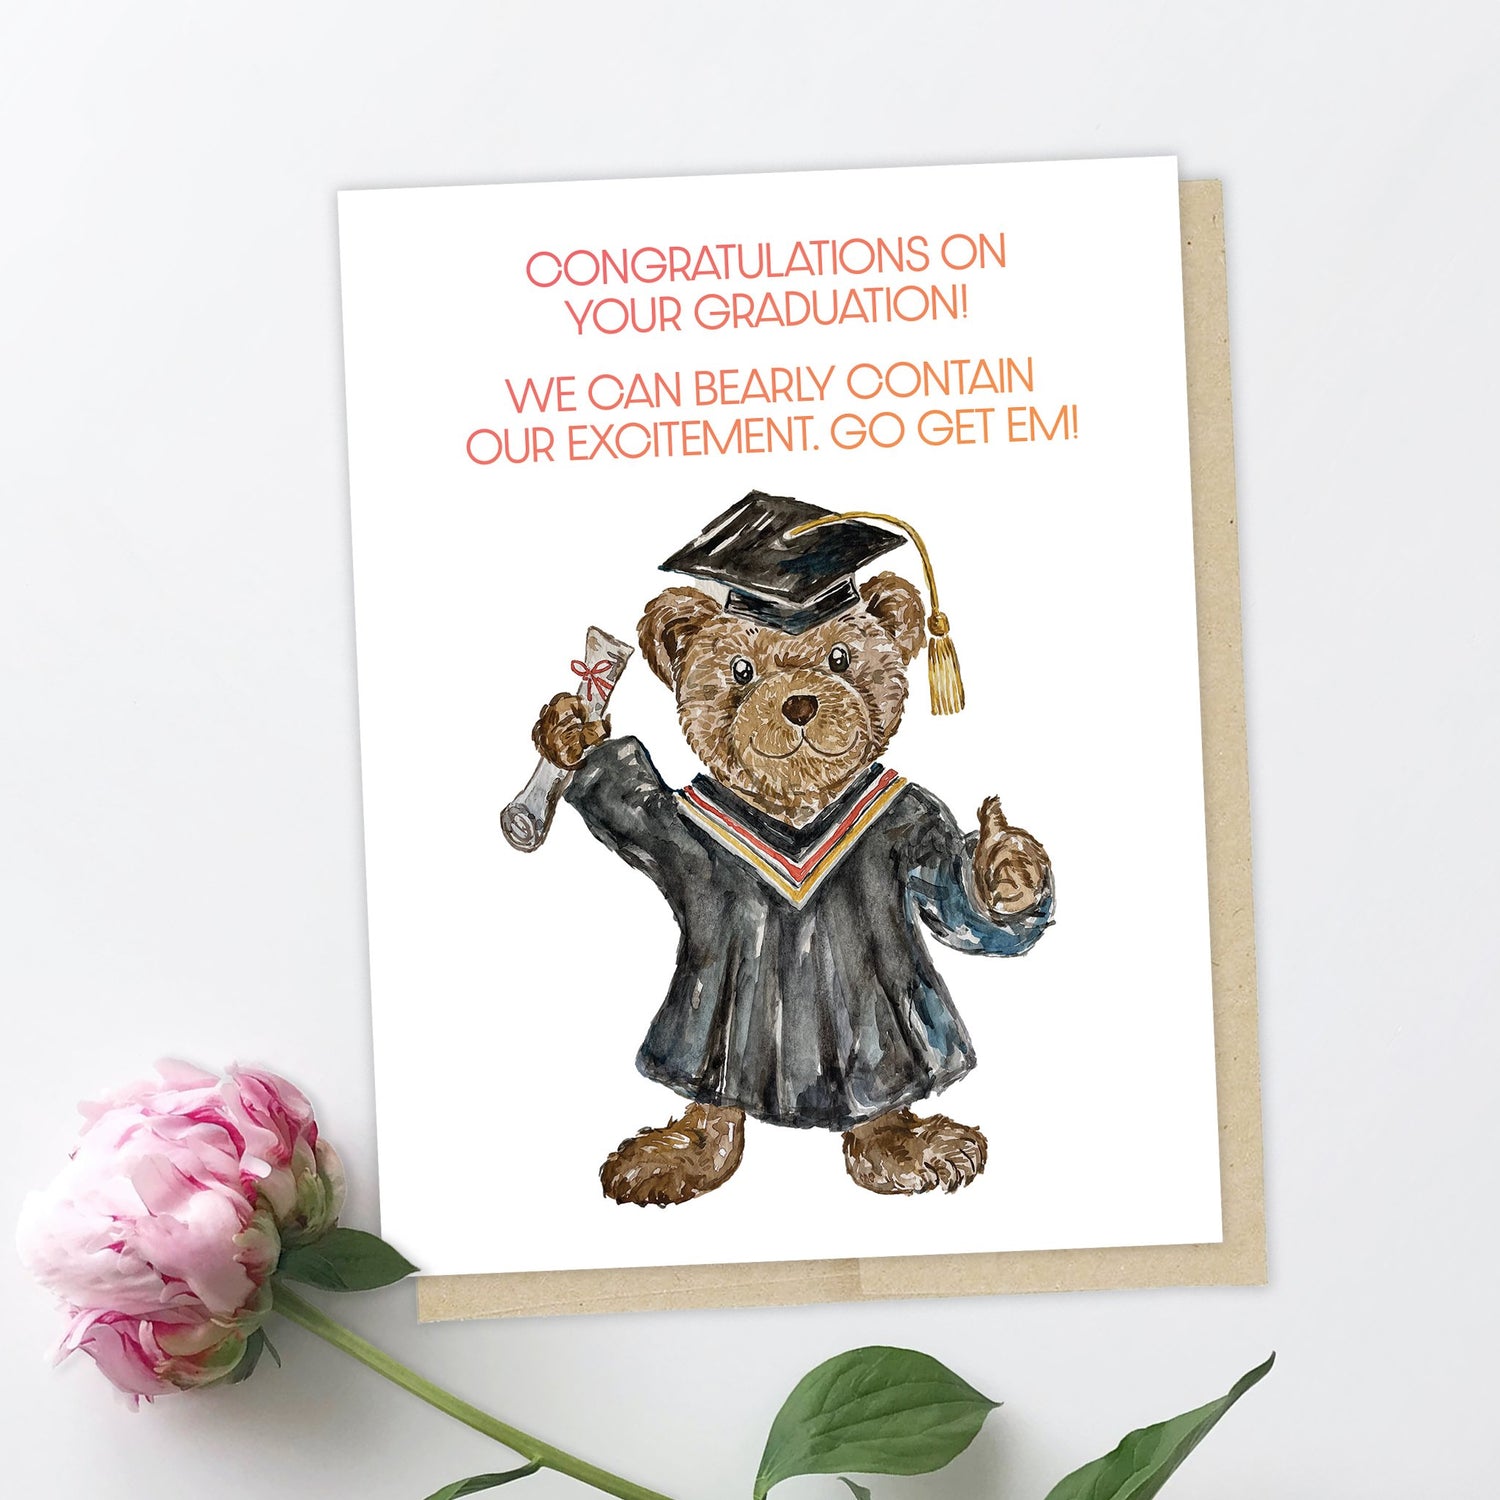 a greeting card of a cute bear in convocation gown, square hat, one hand in the air holding a diploma, other paw with a thumbs up. it says "congratulations on your graduation! we can bearly contain our excitement. go get em!"